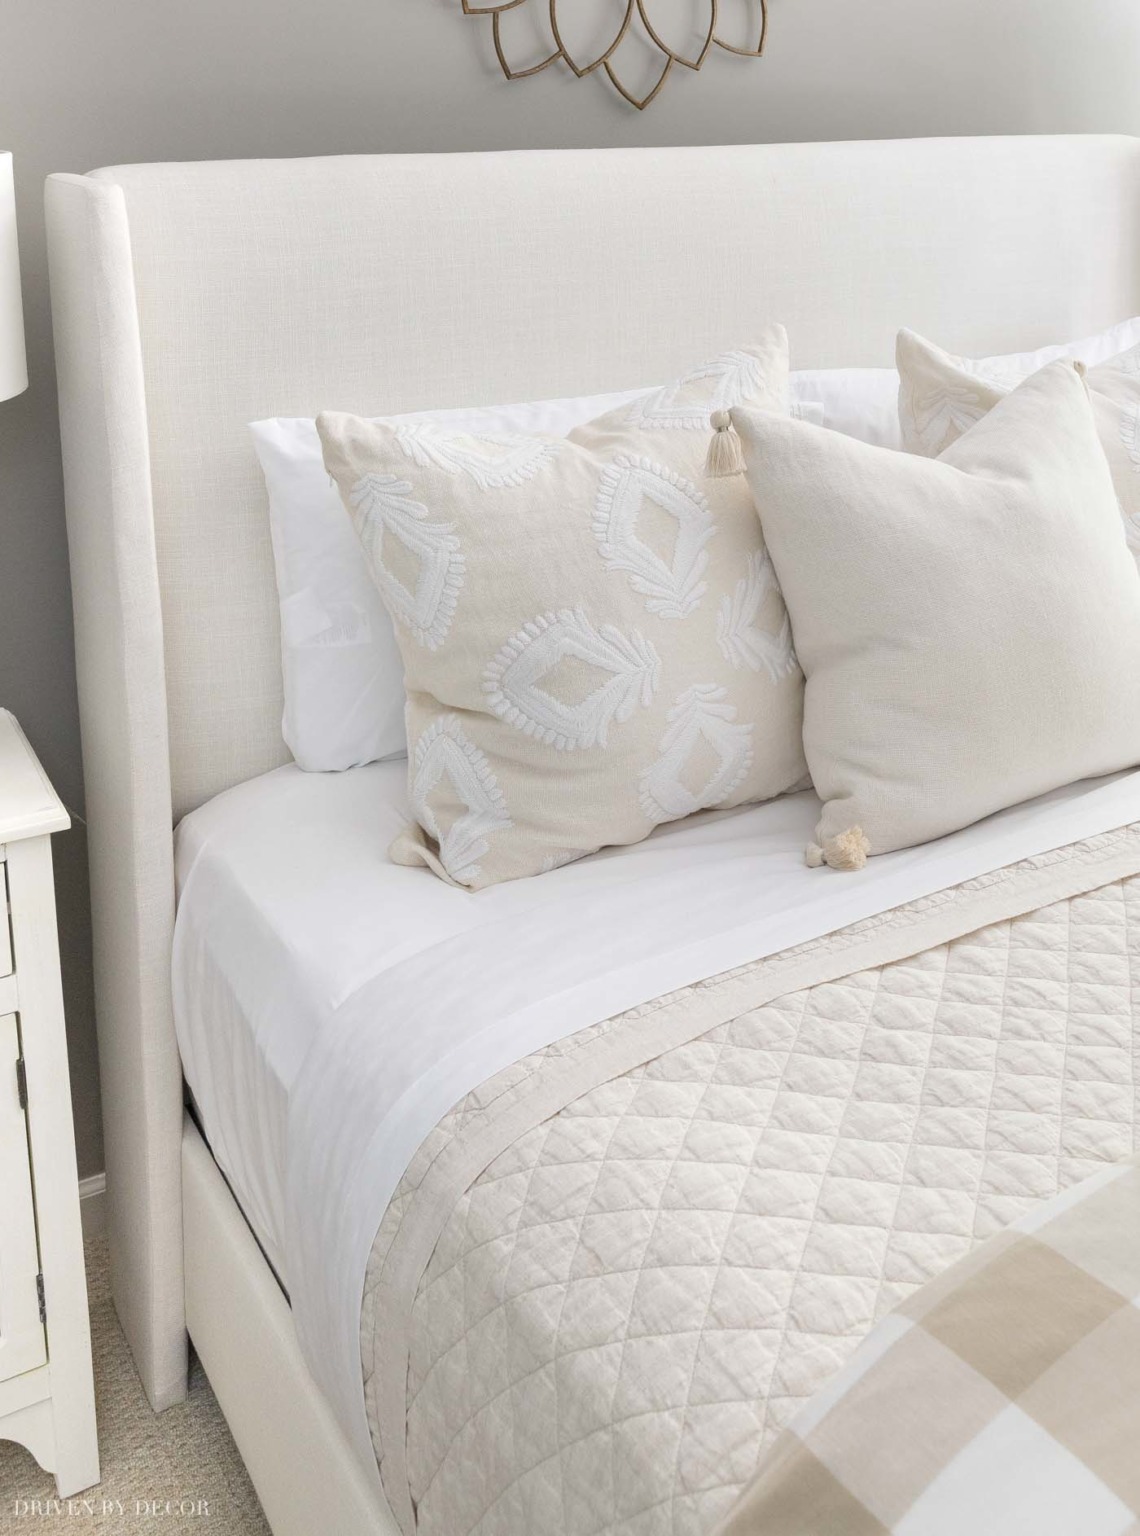 8 Simple Steps to Making the Perfect Bed